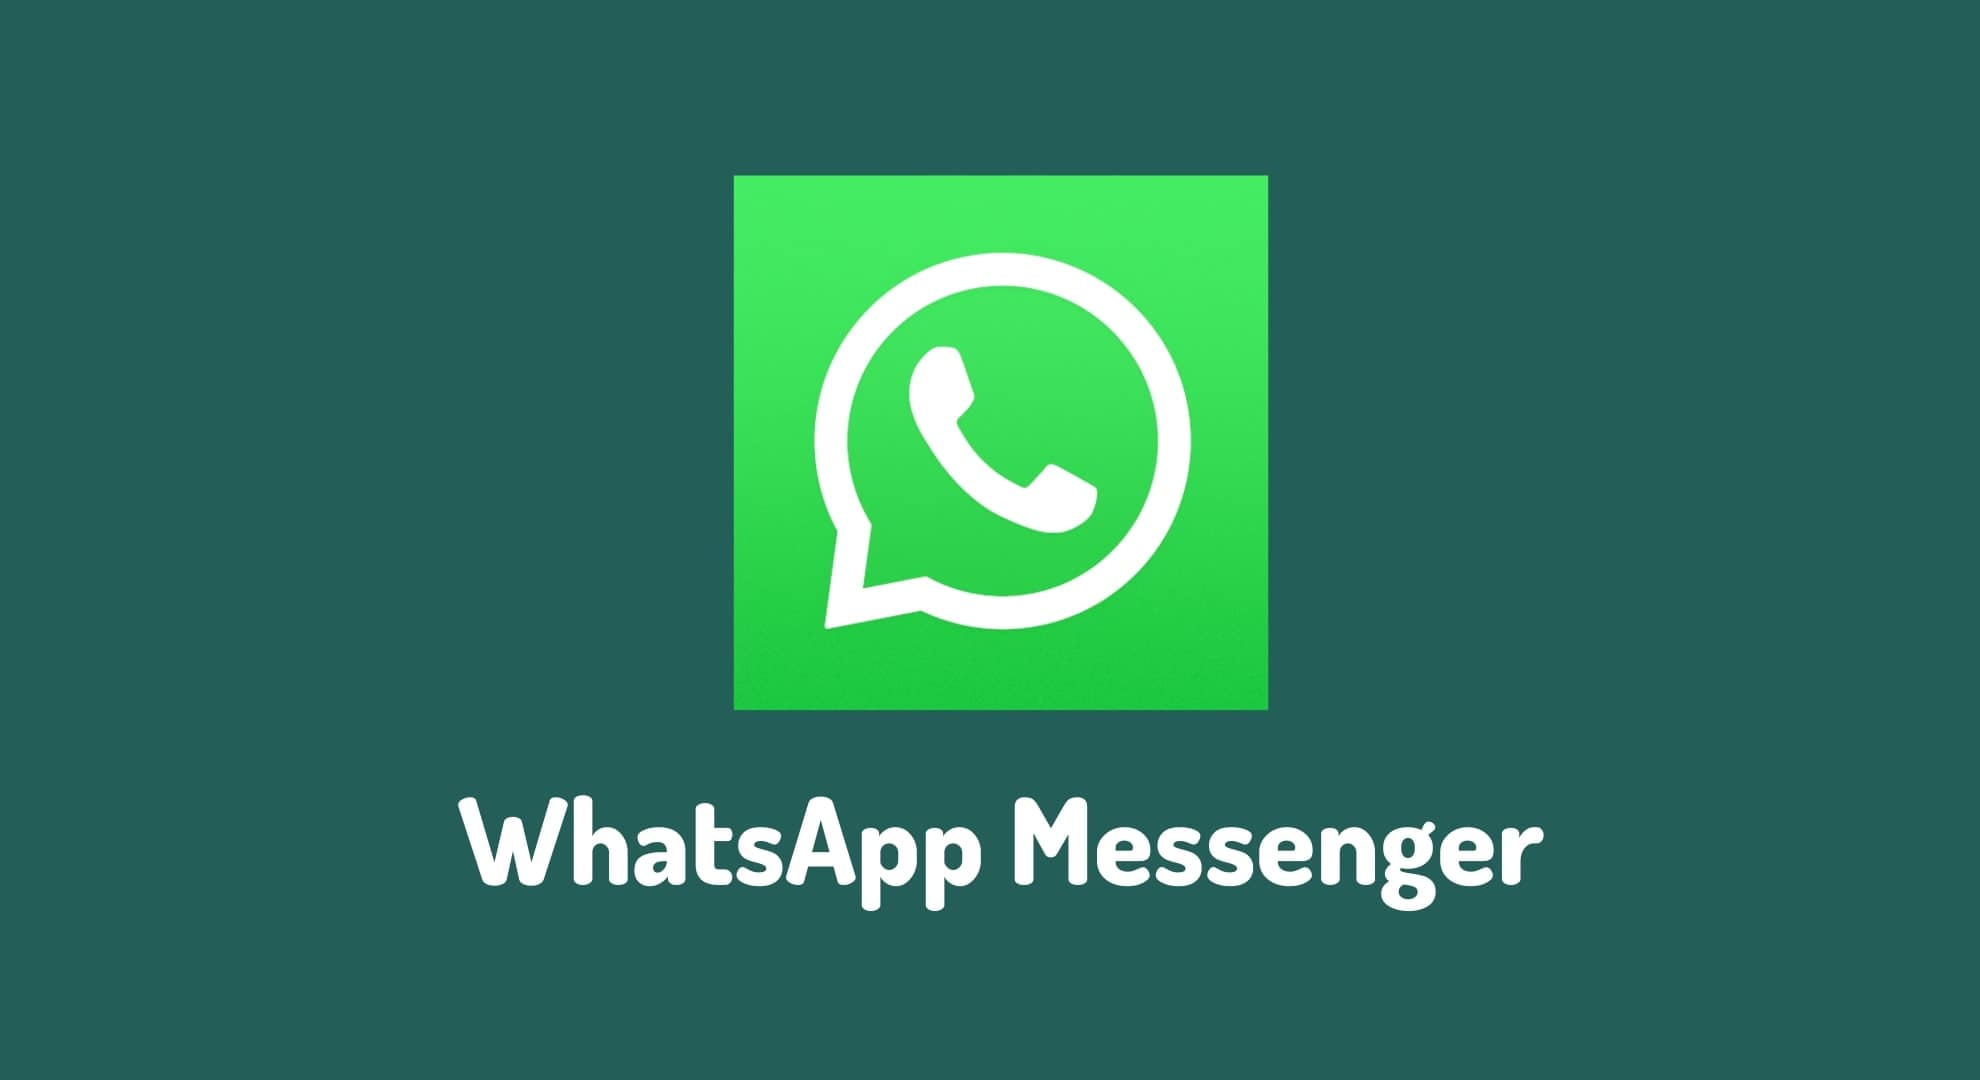 WhatsApp Messenger, WhatsApp Messenger APK, WhatsApp for Android